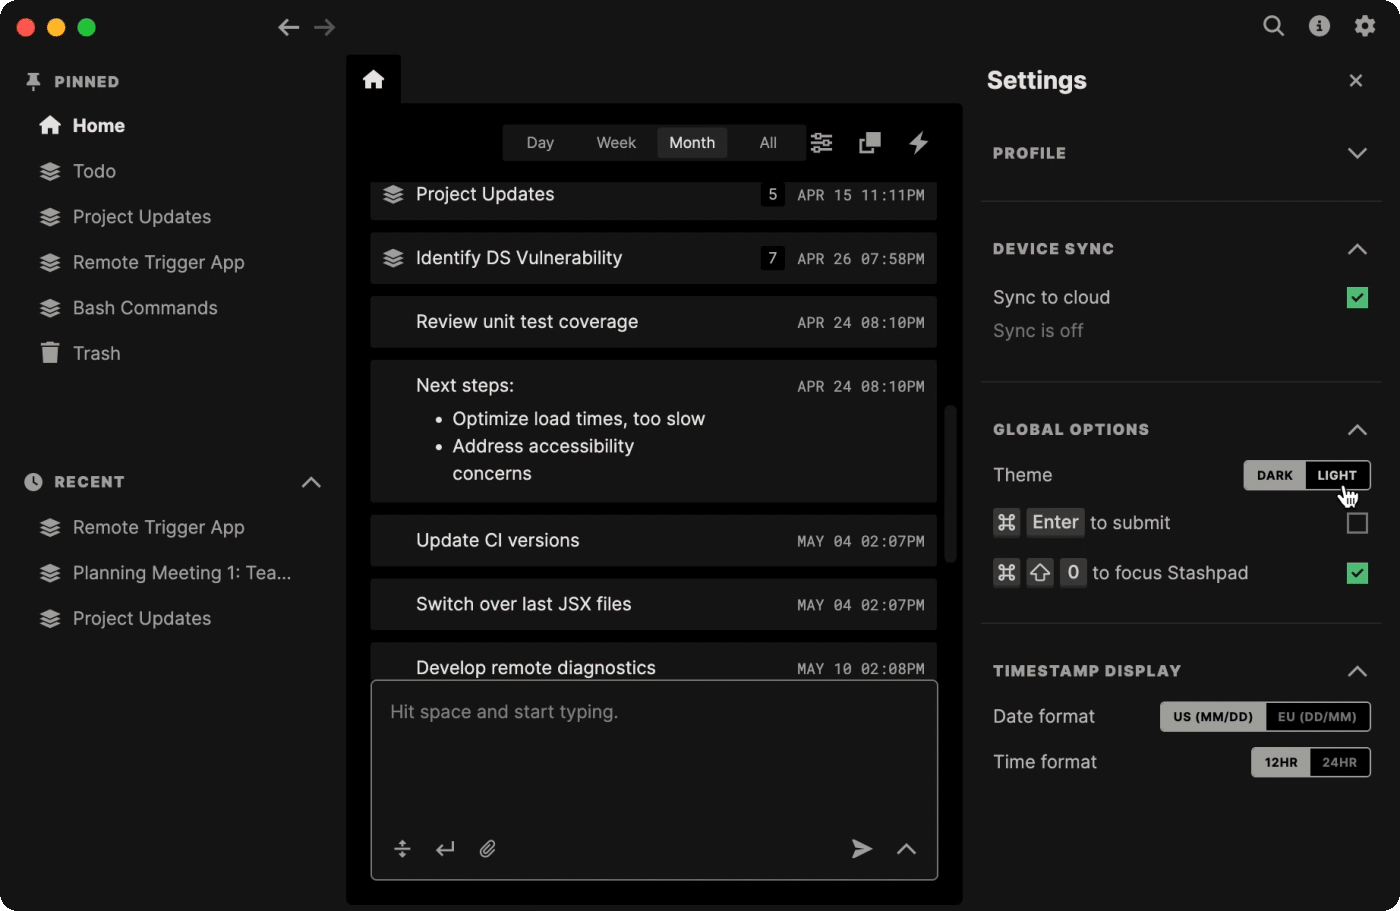 Toggle themes from the settings menu